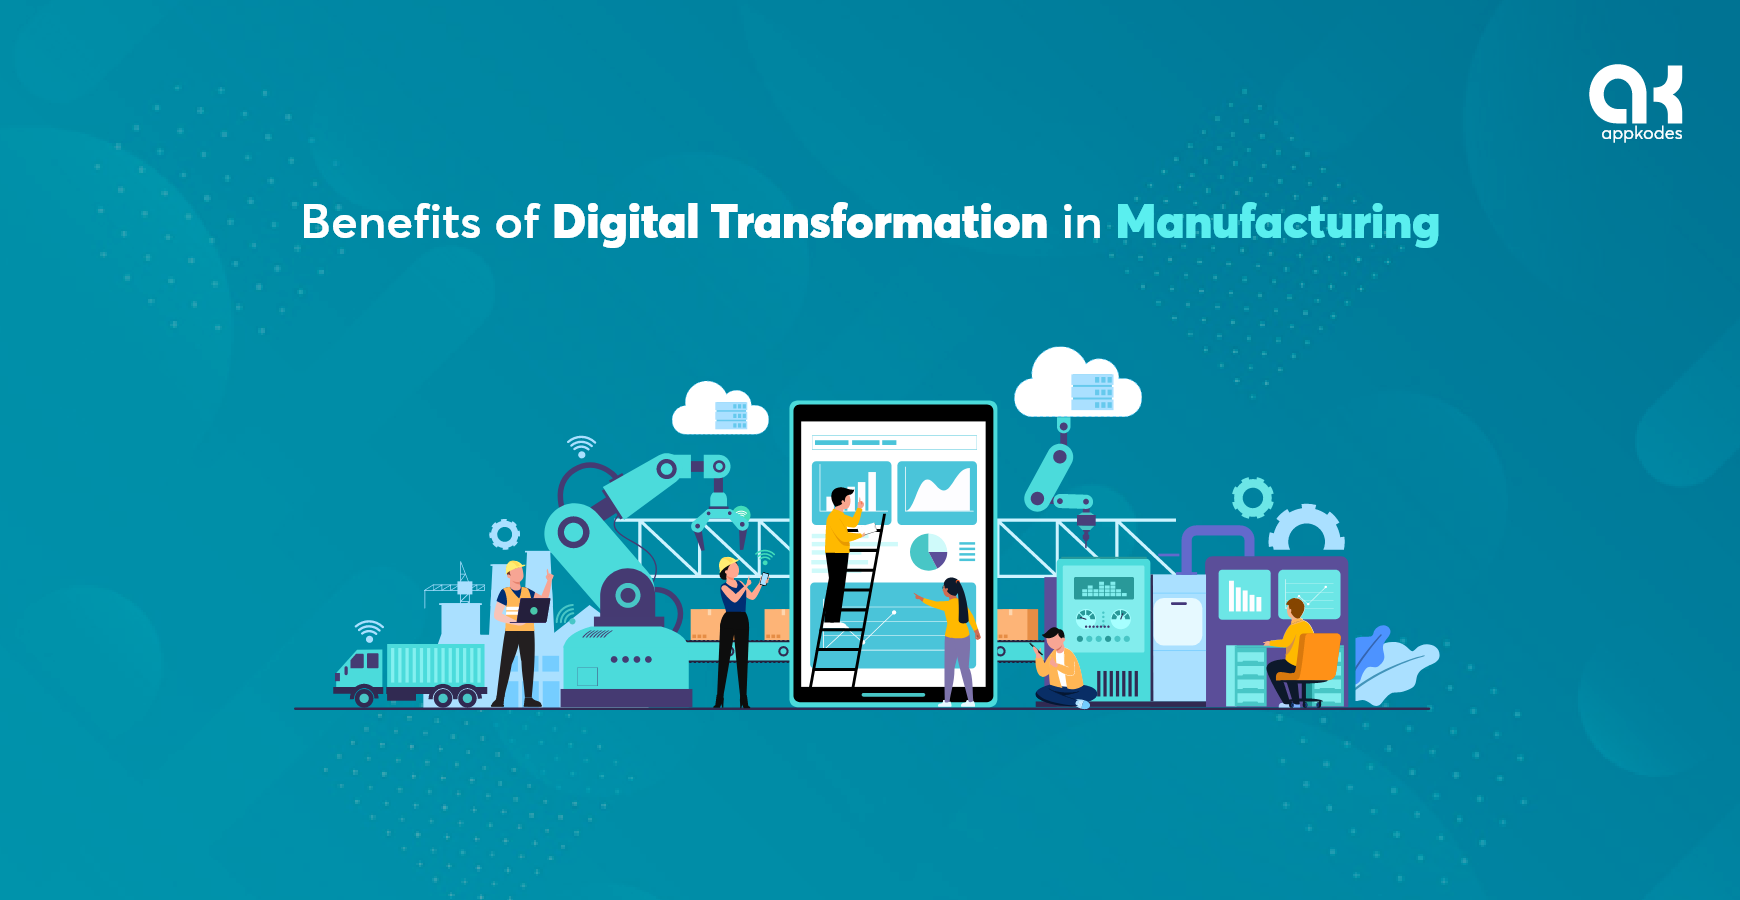 Benefits of digital transformation in manufacturing